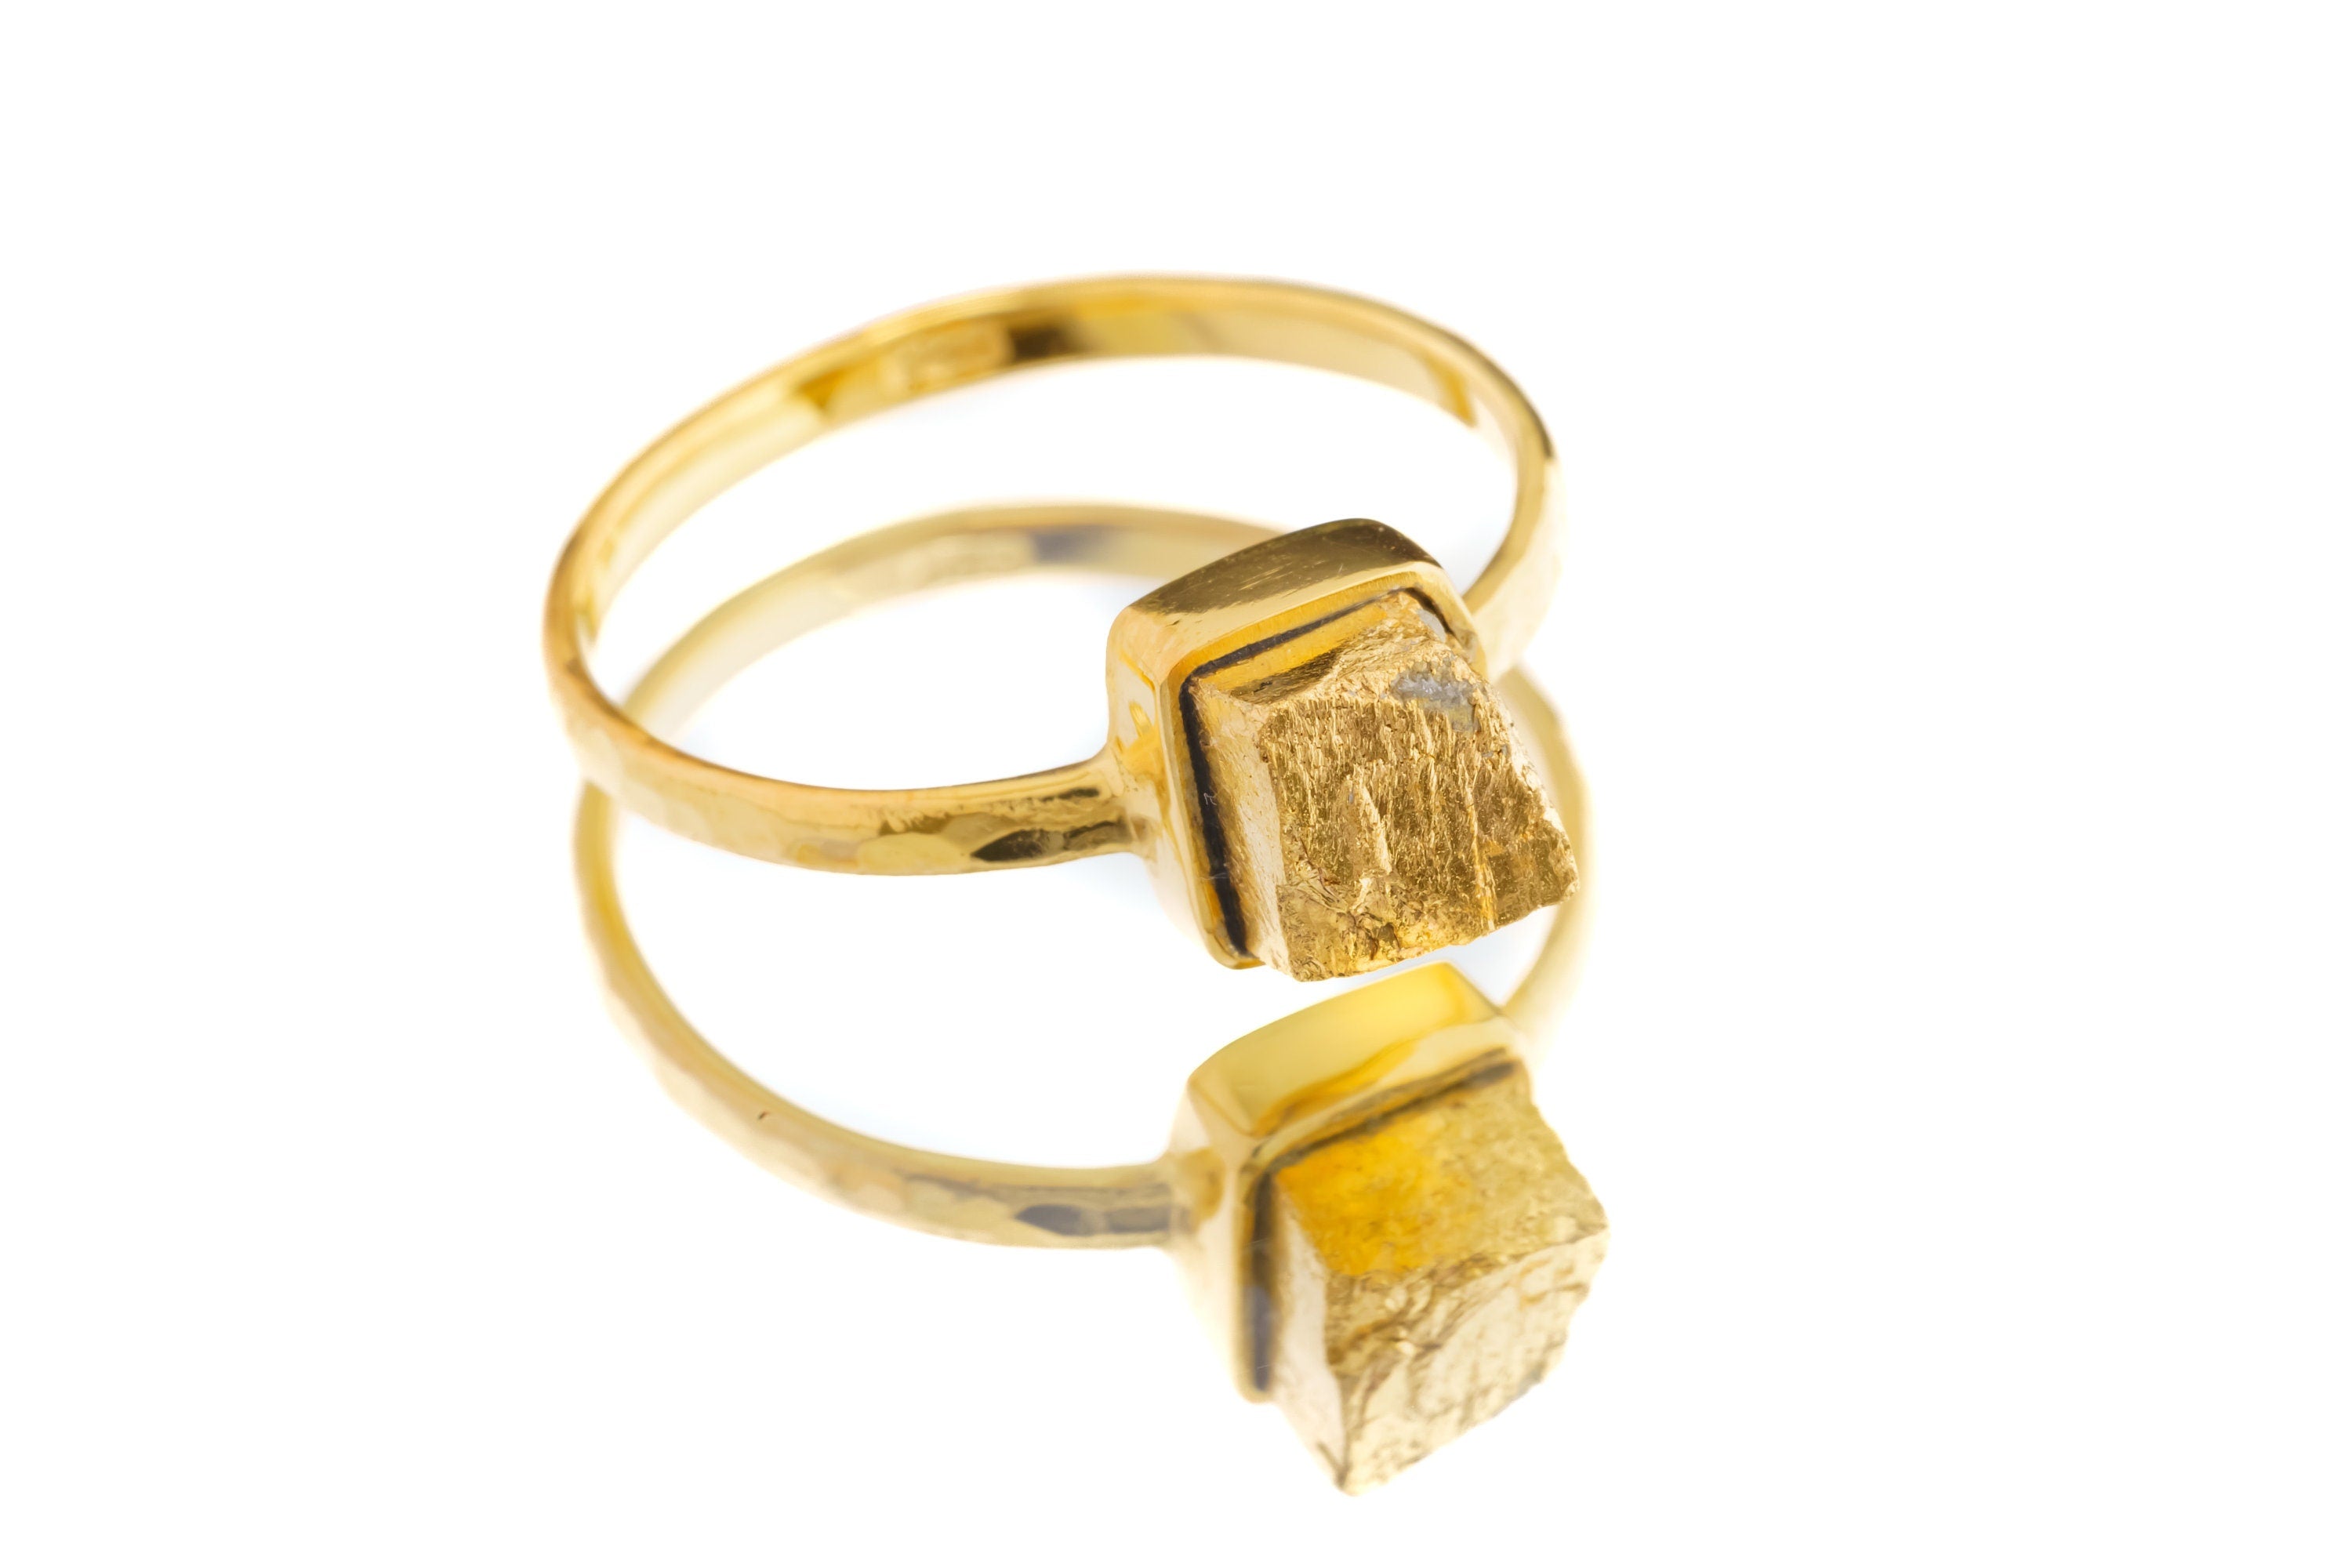 Gold Coated Australian Cubic Pyrite - Stack Crystal Ring - Size 6 US - Gold Plated 925 Sterling Silver - Thin Band Hammer Textured